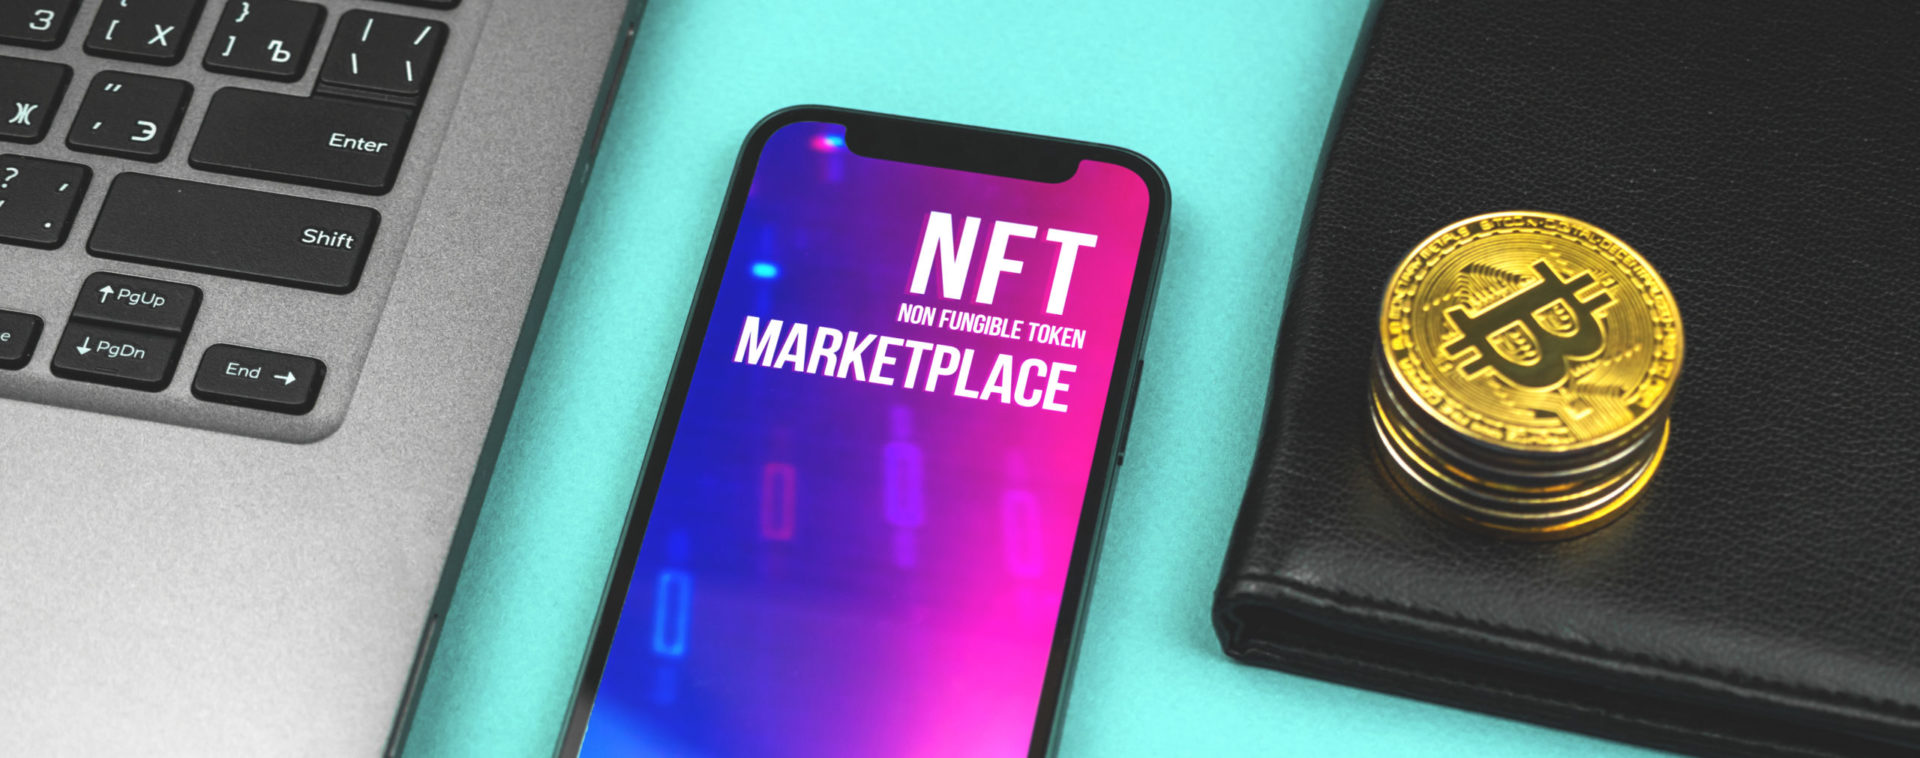 What is an NFT marketplace?